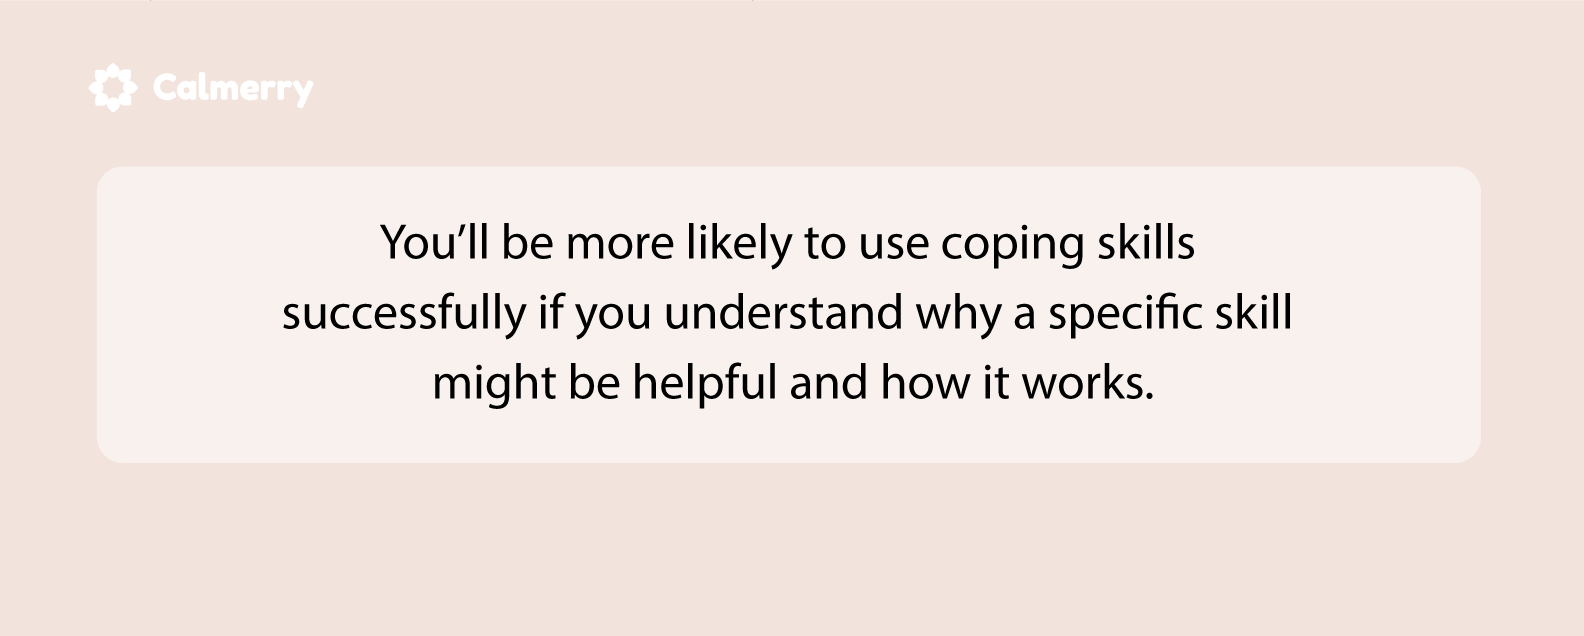 You’ll be more likely to use coping skills successfully if you understand why a specific skill might be helpful and how it works.